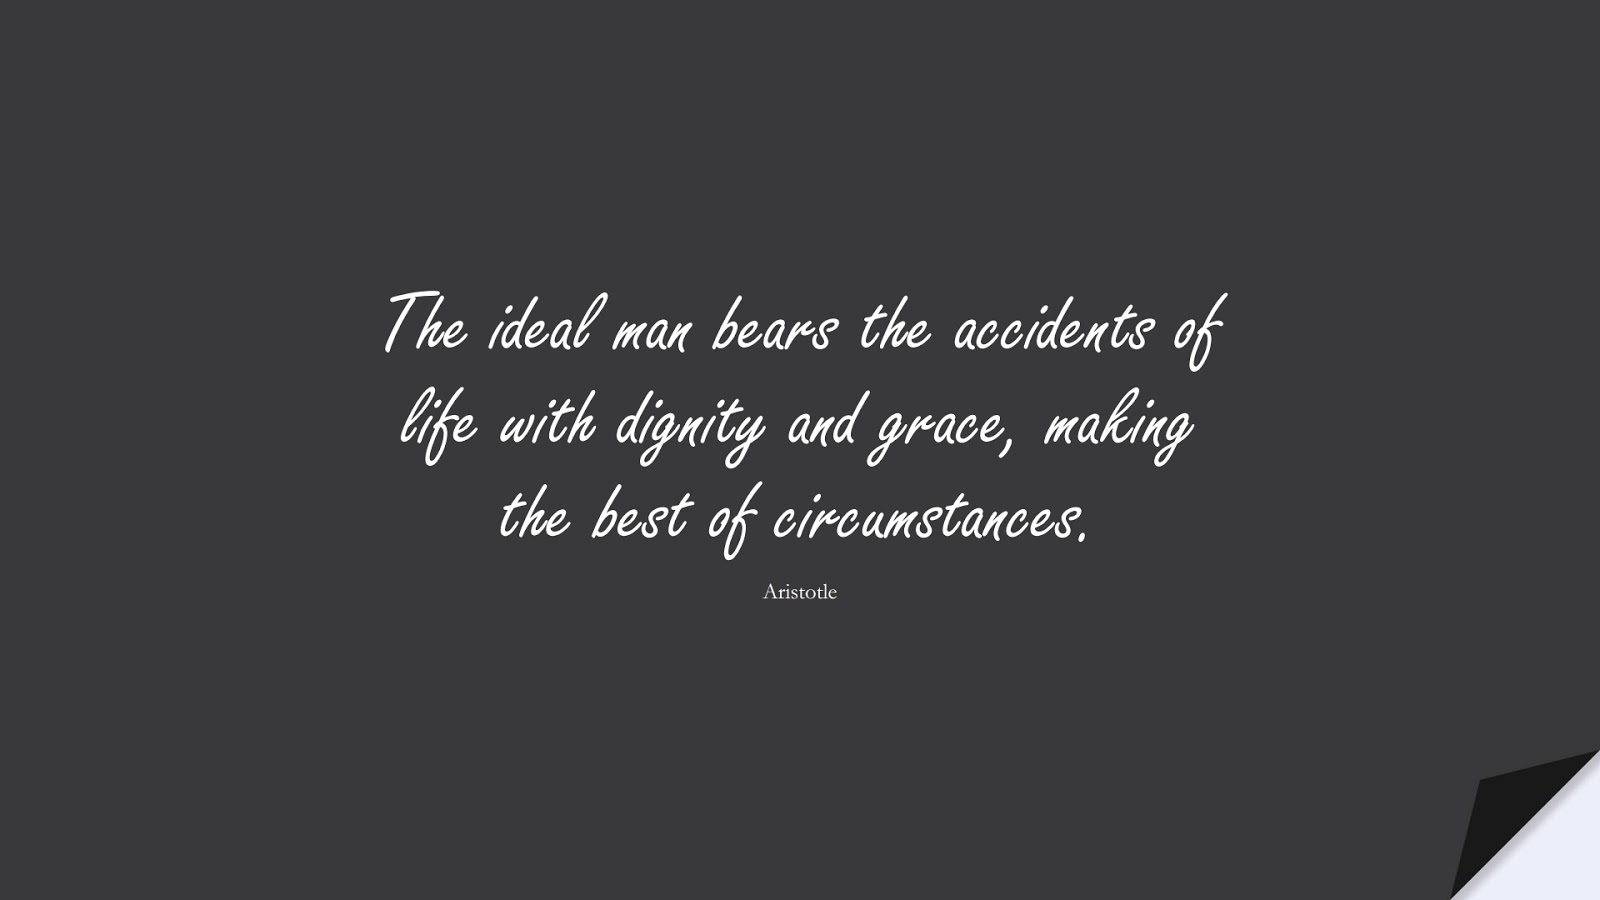 The ideal man bears the accidents of life with dignity and grace, making the best of circumstances. (Aristotle);  #NeverGiveUpQuotes